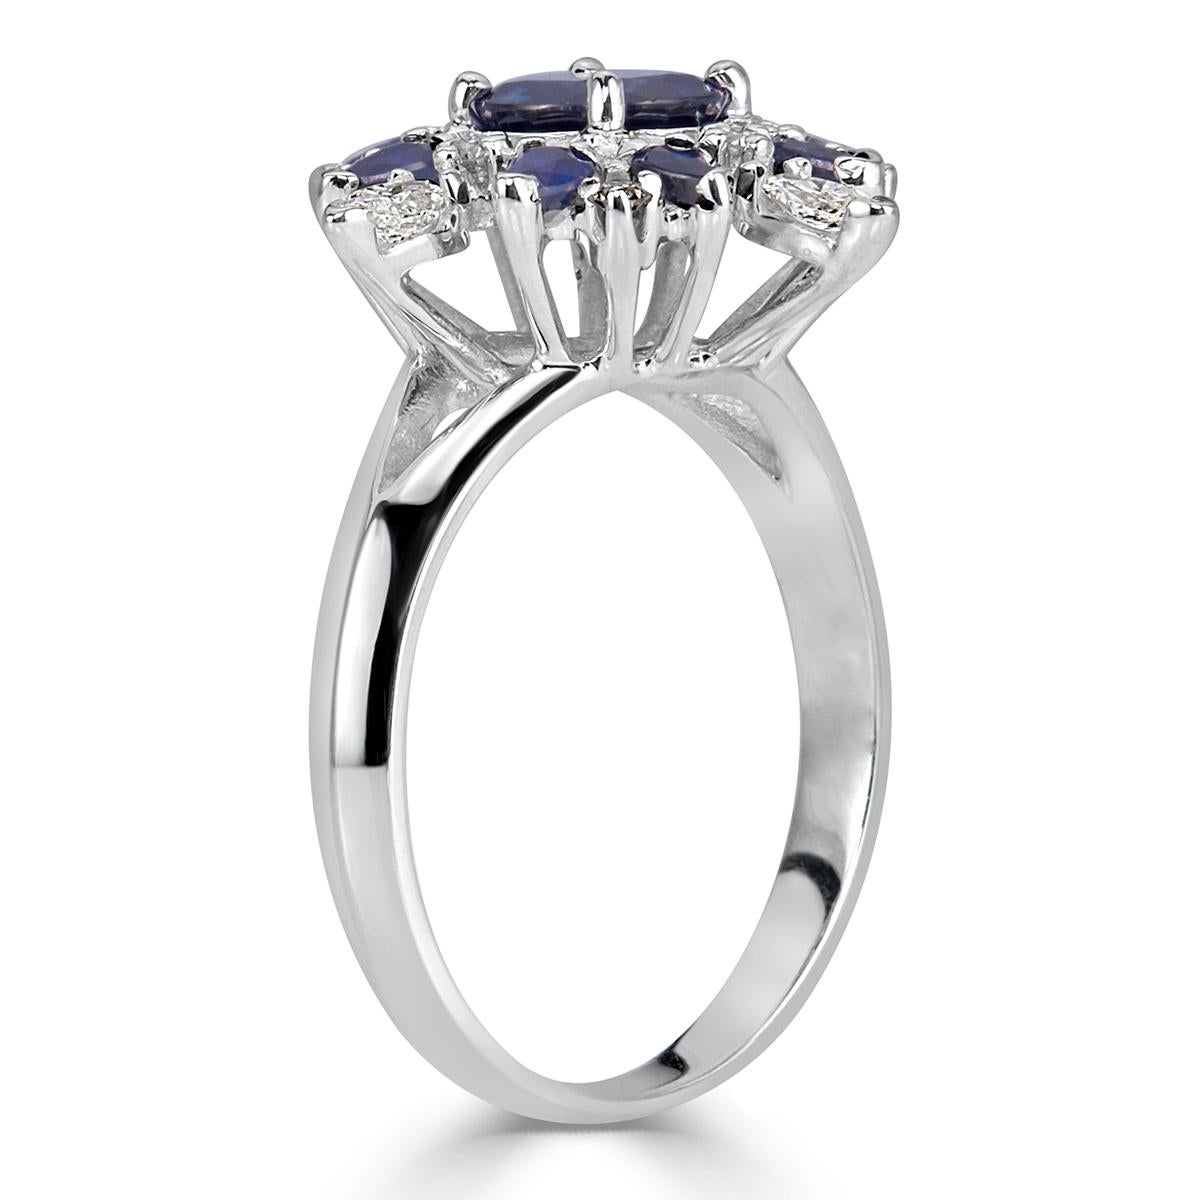 Women's or Men's Mark Broumand 1.82 Carat Round Cut Sapphire and Diamond Estate Ring For Sale